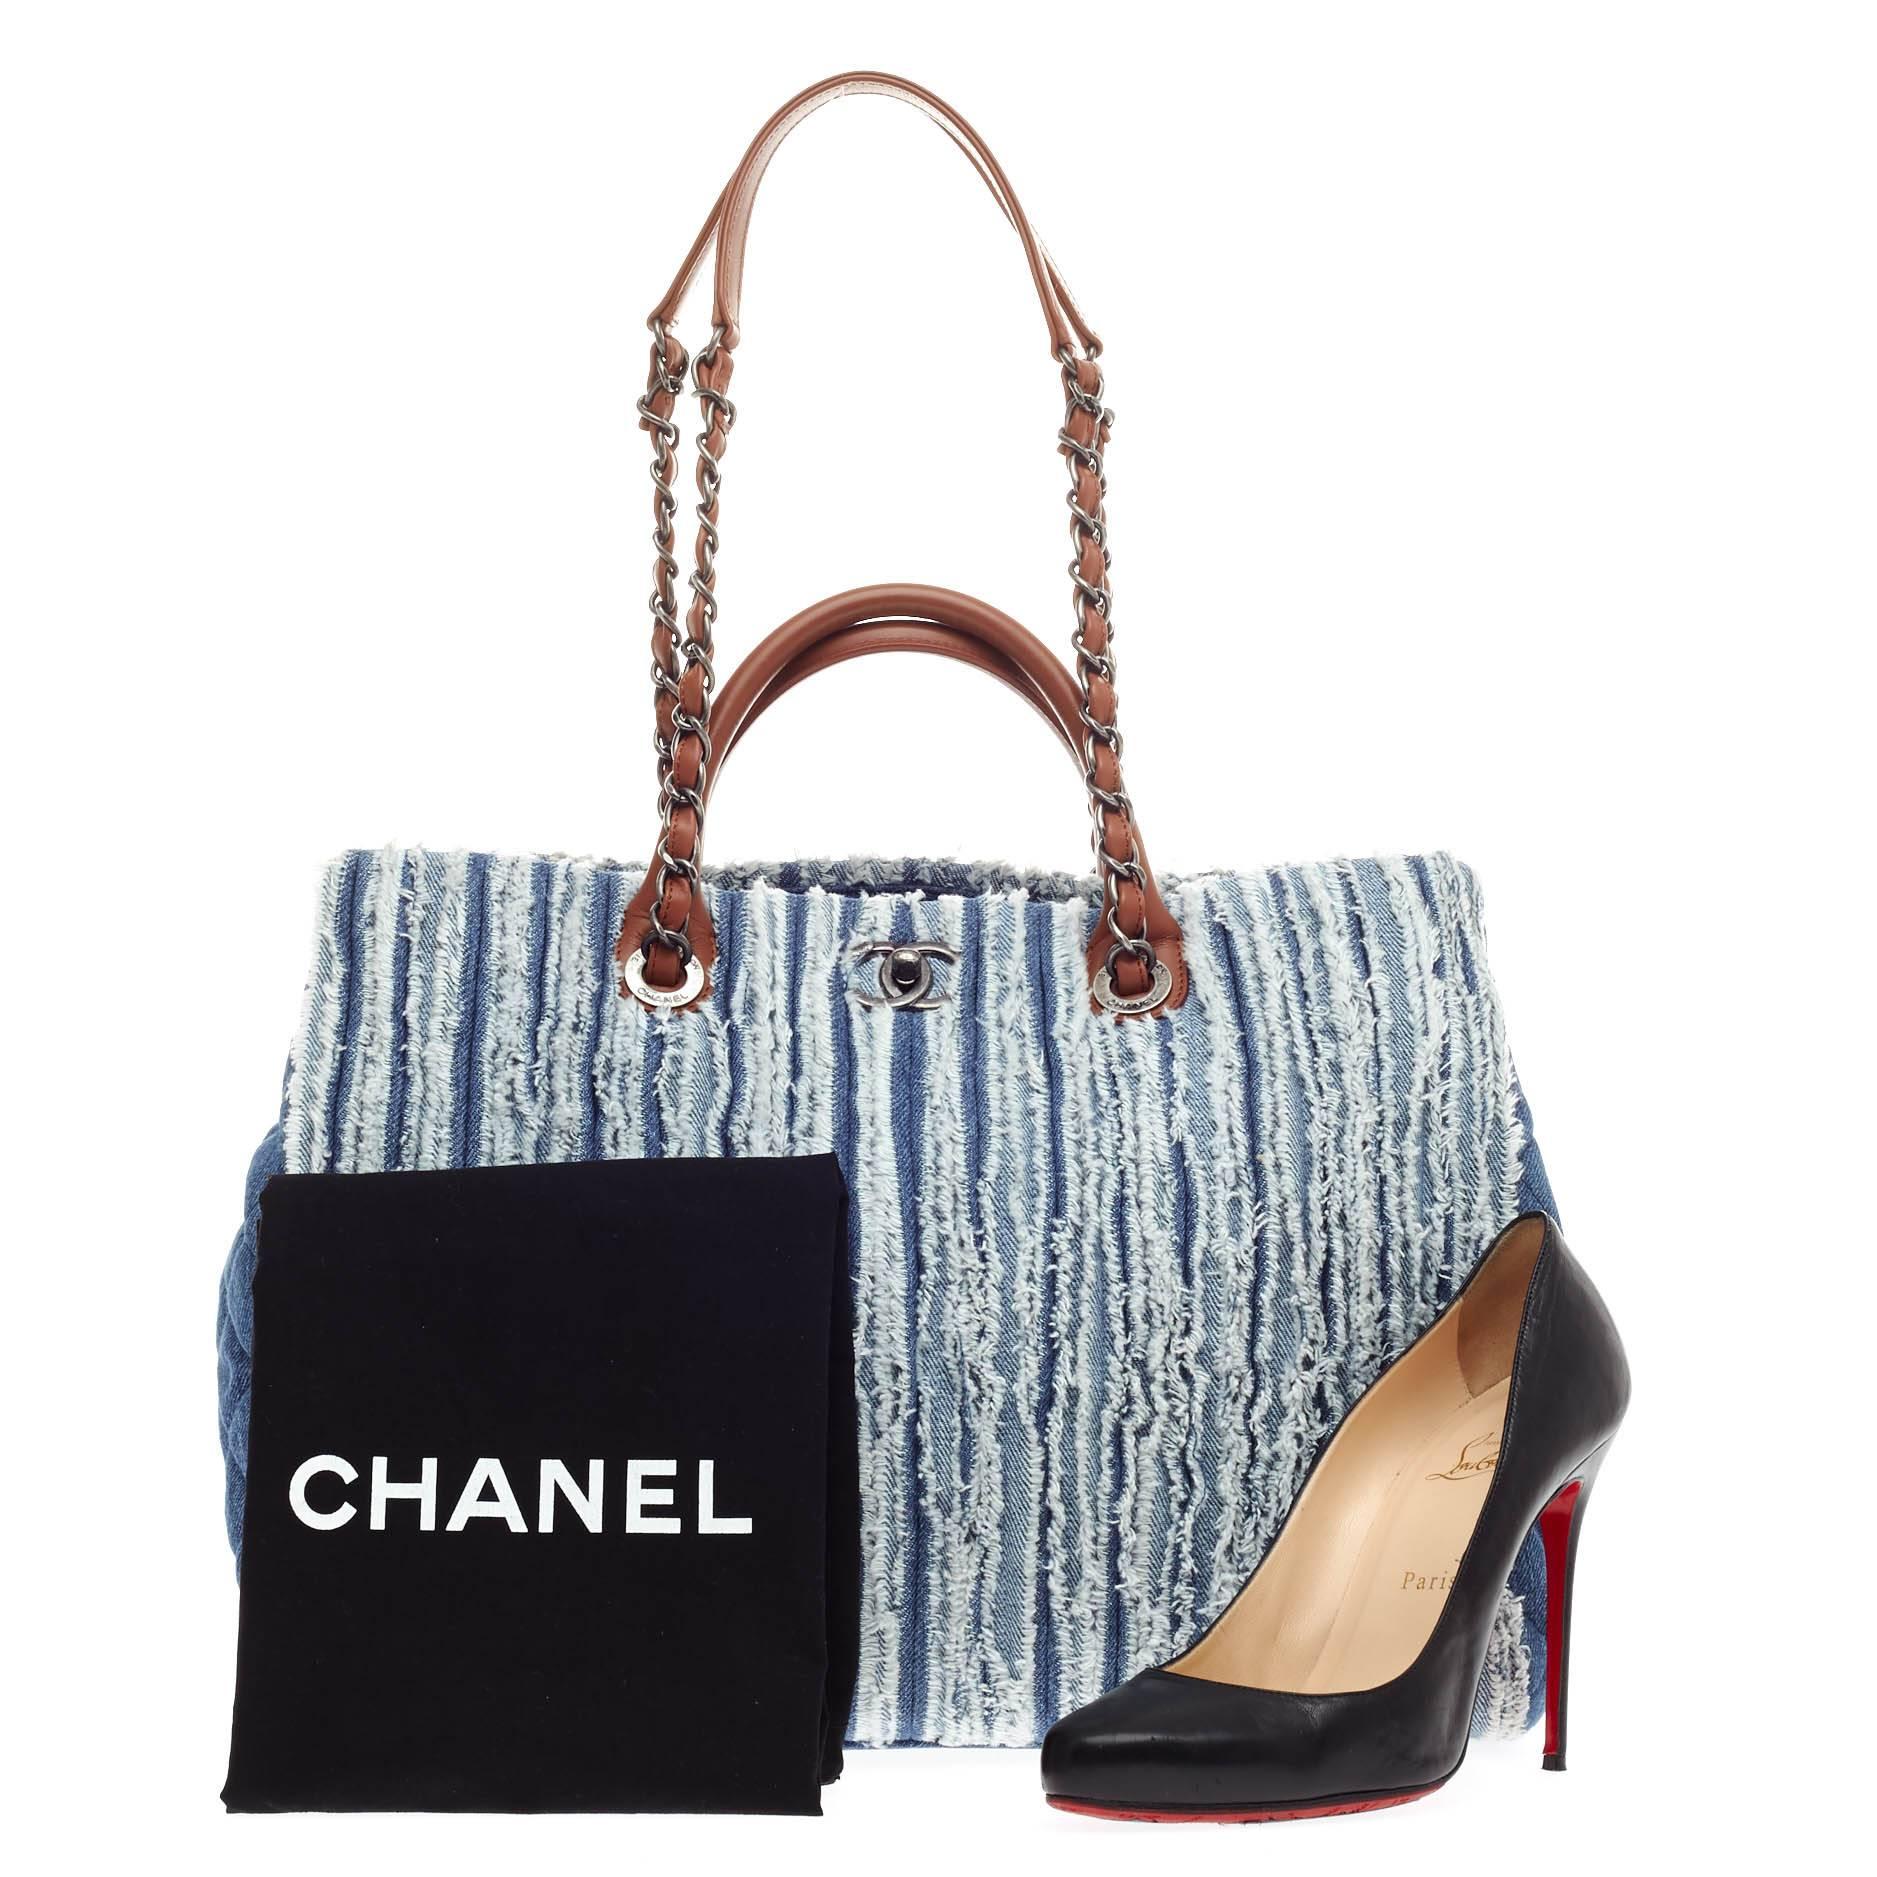 This authentic Chanel Shopping Tote Fringe Denim Large from the brand's Pre-Spring/Summer 2015 collection held in Dubai updated its classic tote design with meticulous design in a retro-inspired theme. Crafted in washed frayed denim, this stand-out